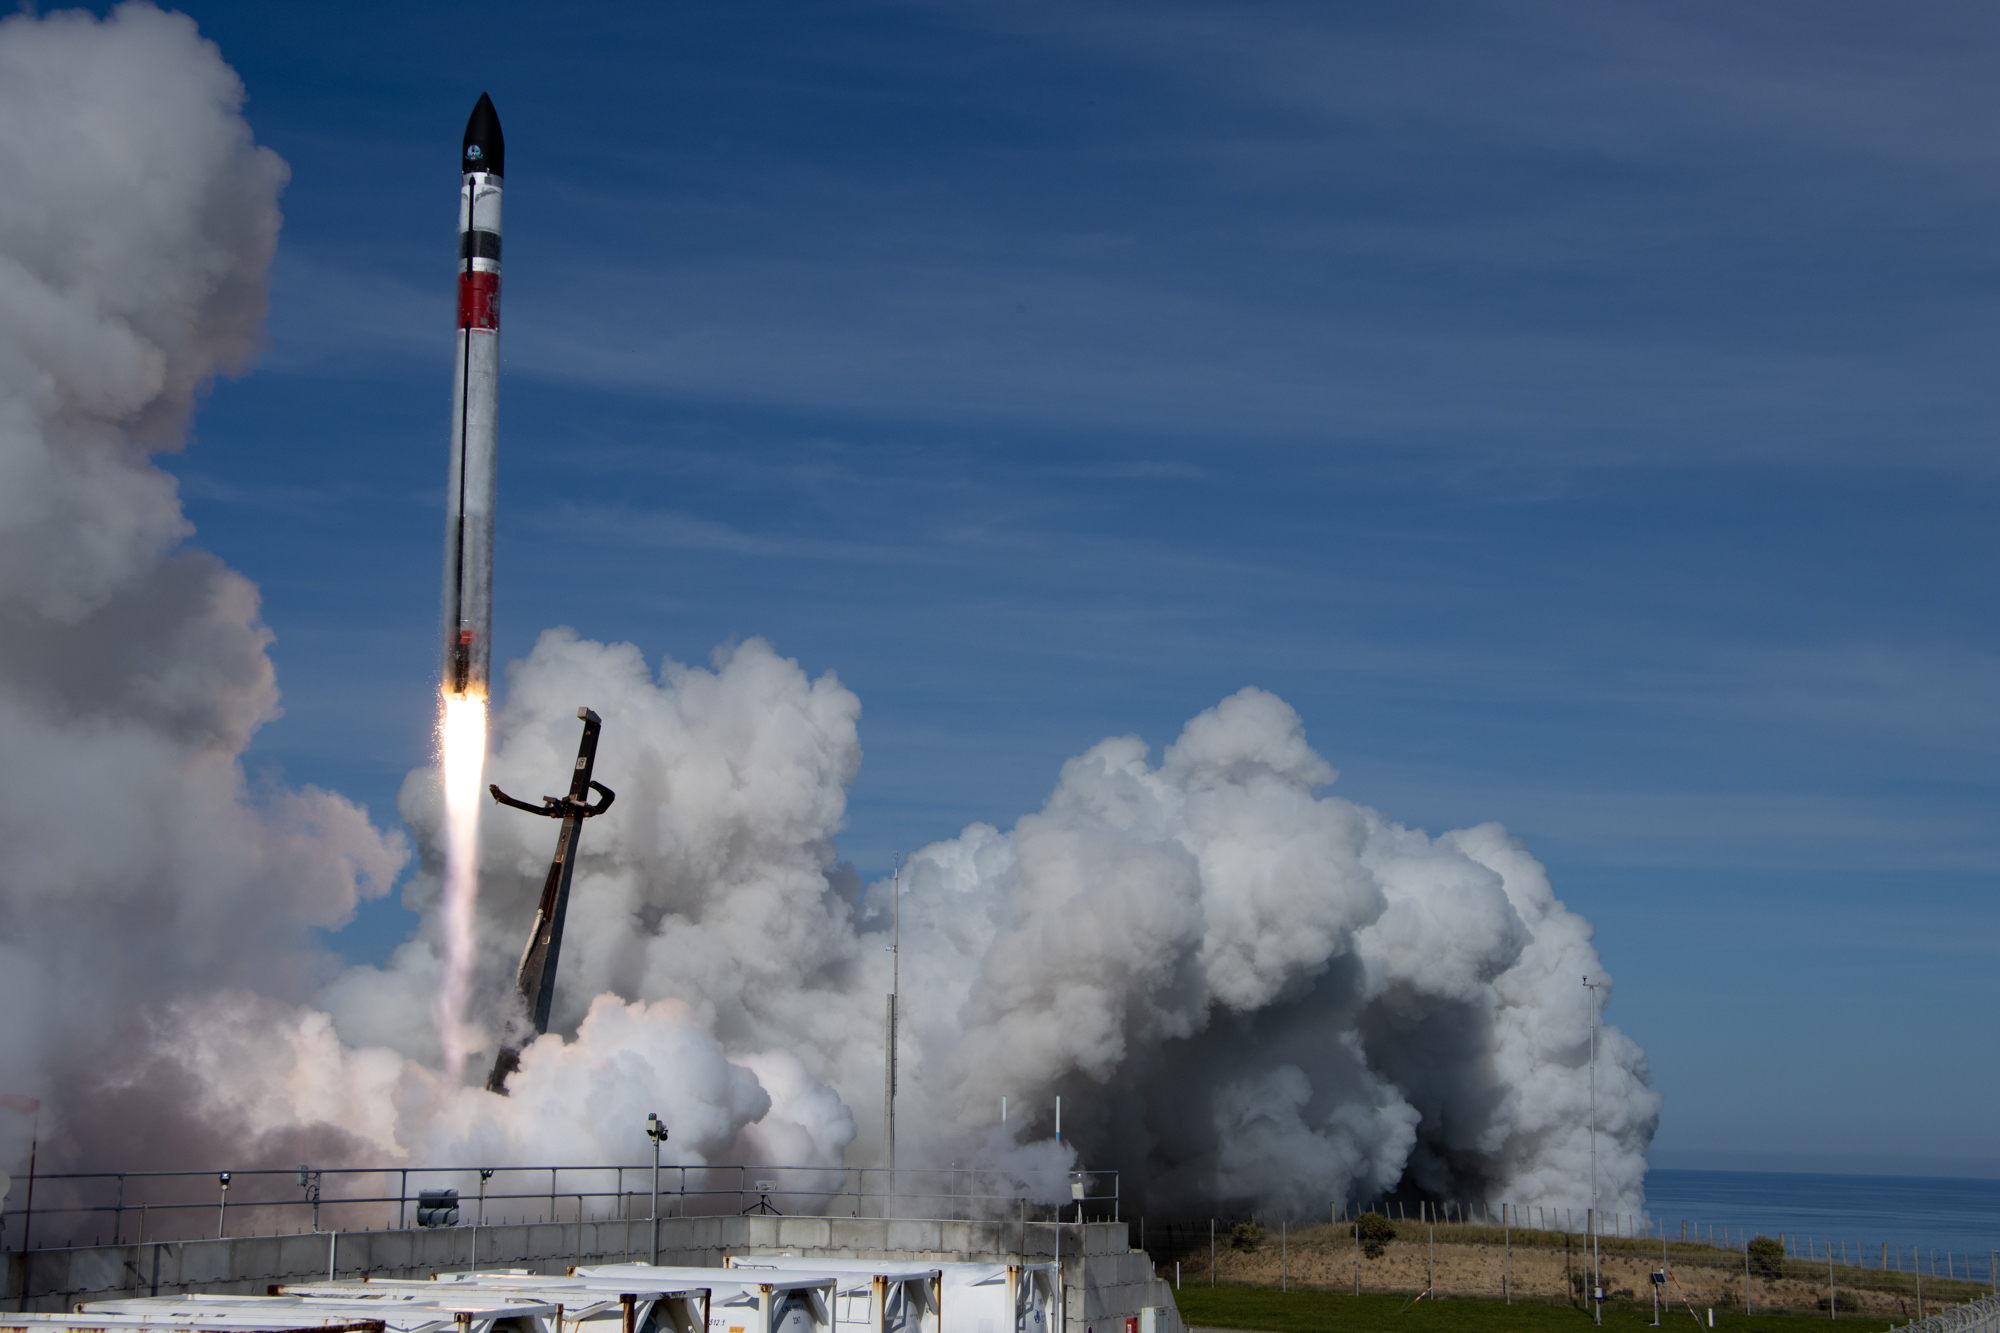 Rocket Lab's 1st US launch may be visible along East Coast on Dec. 16. Here's where to look.